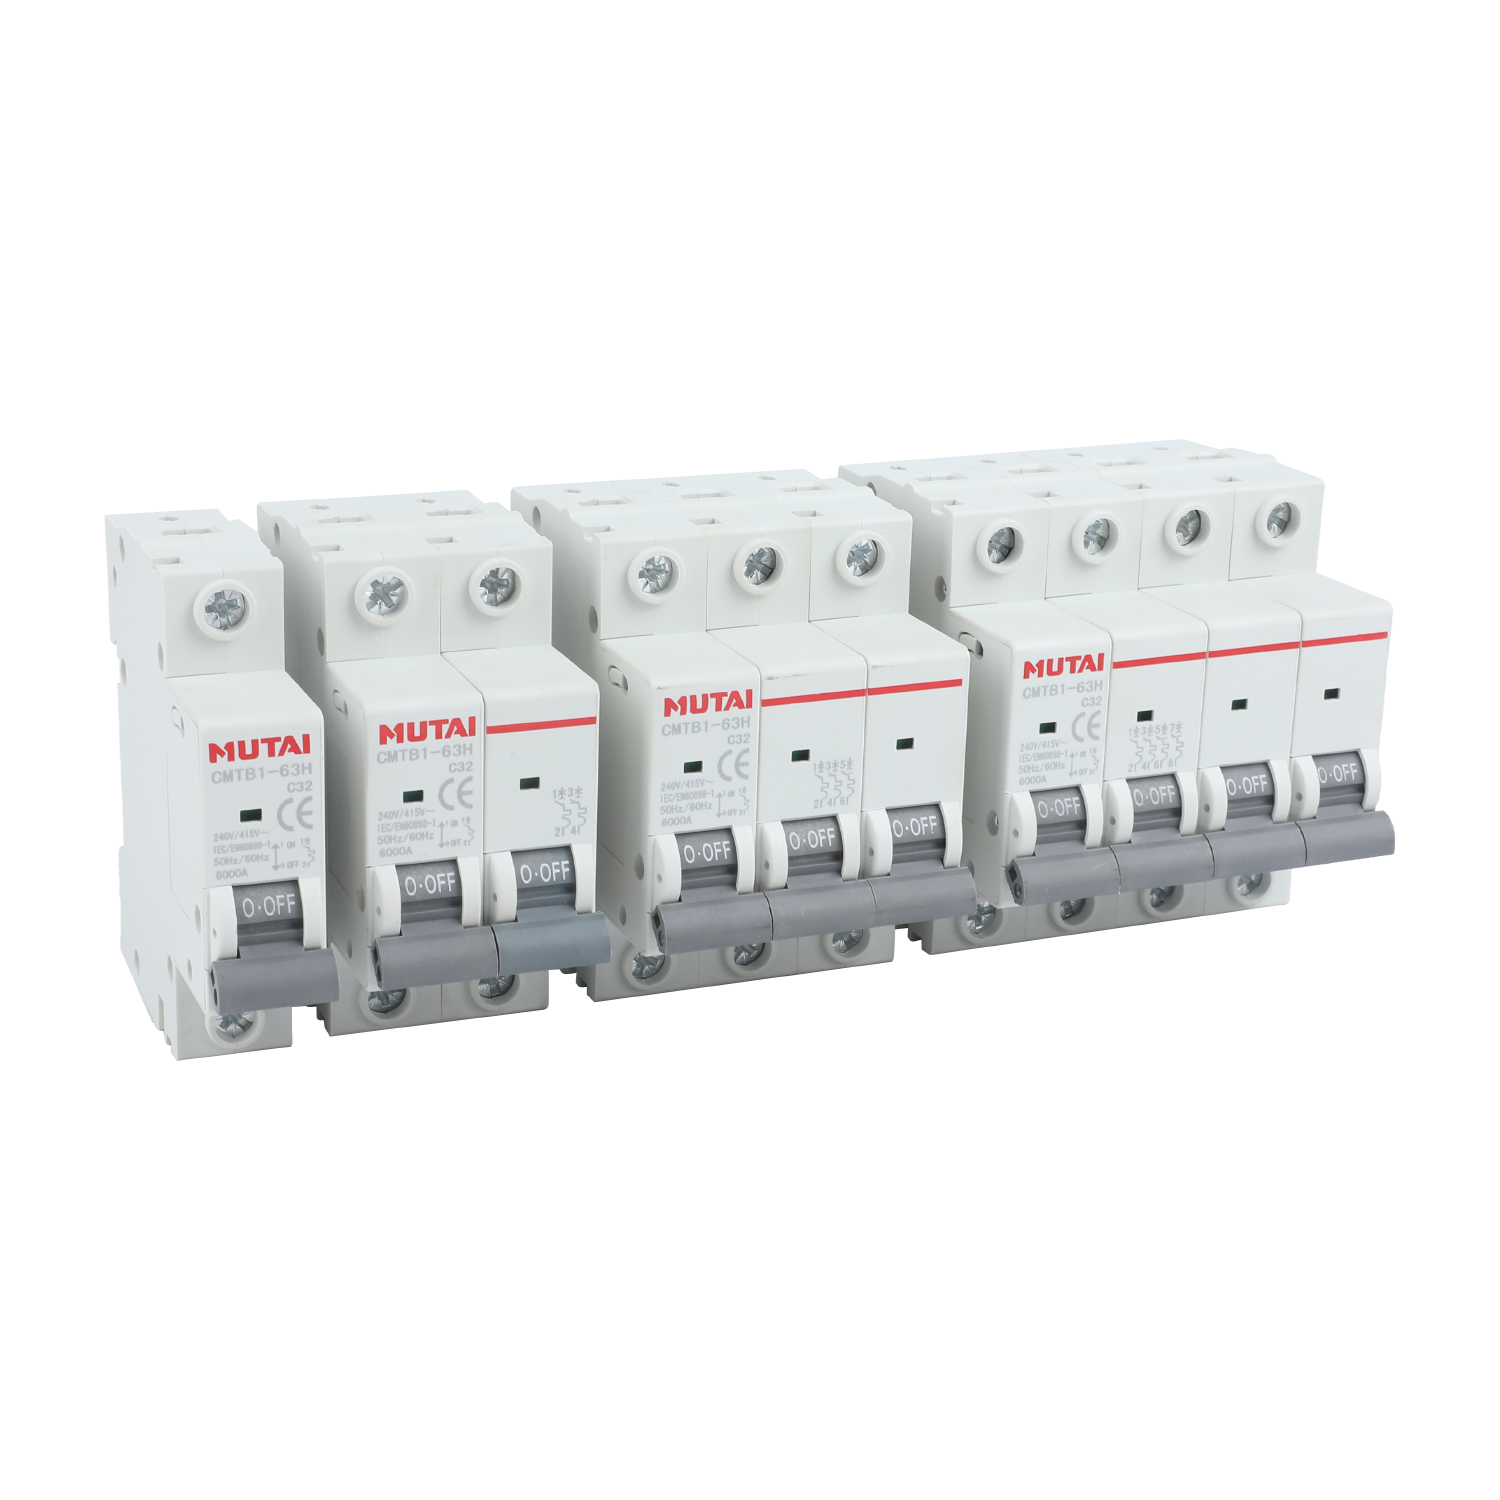 Miniature Circuit Breakers: Keeping Your Electrical System Safe